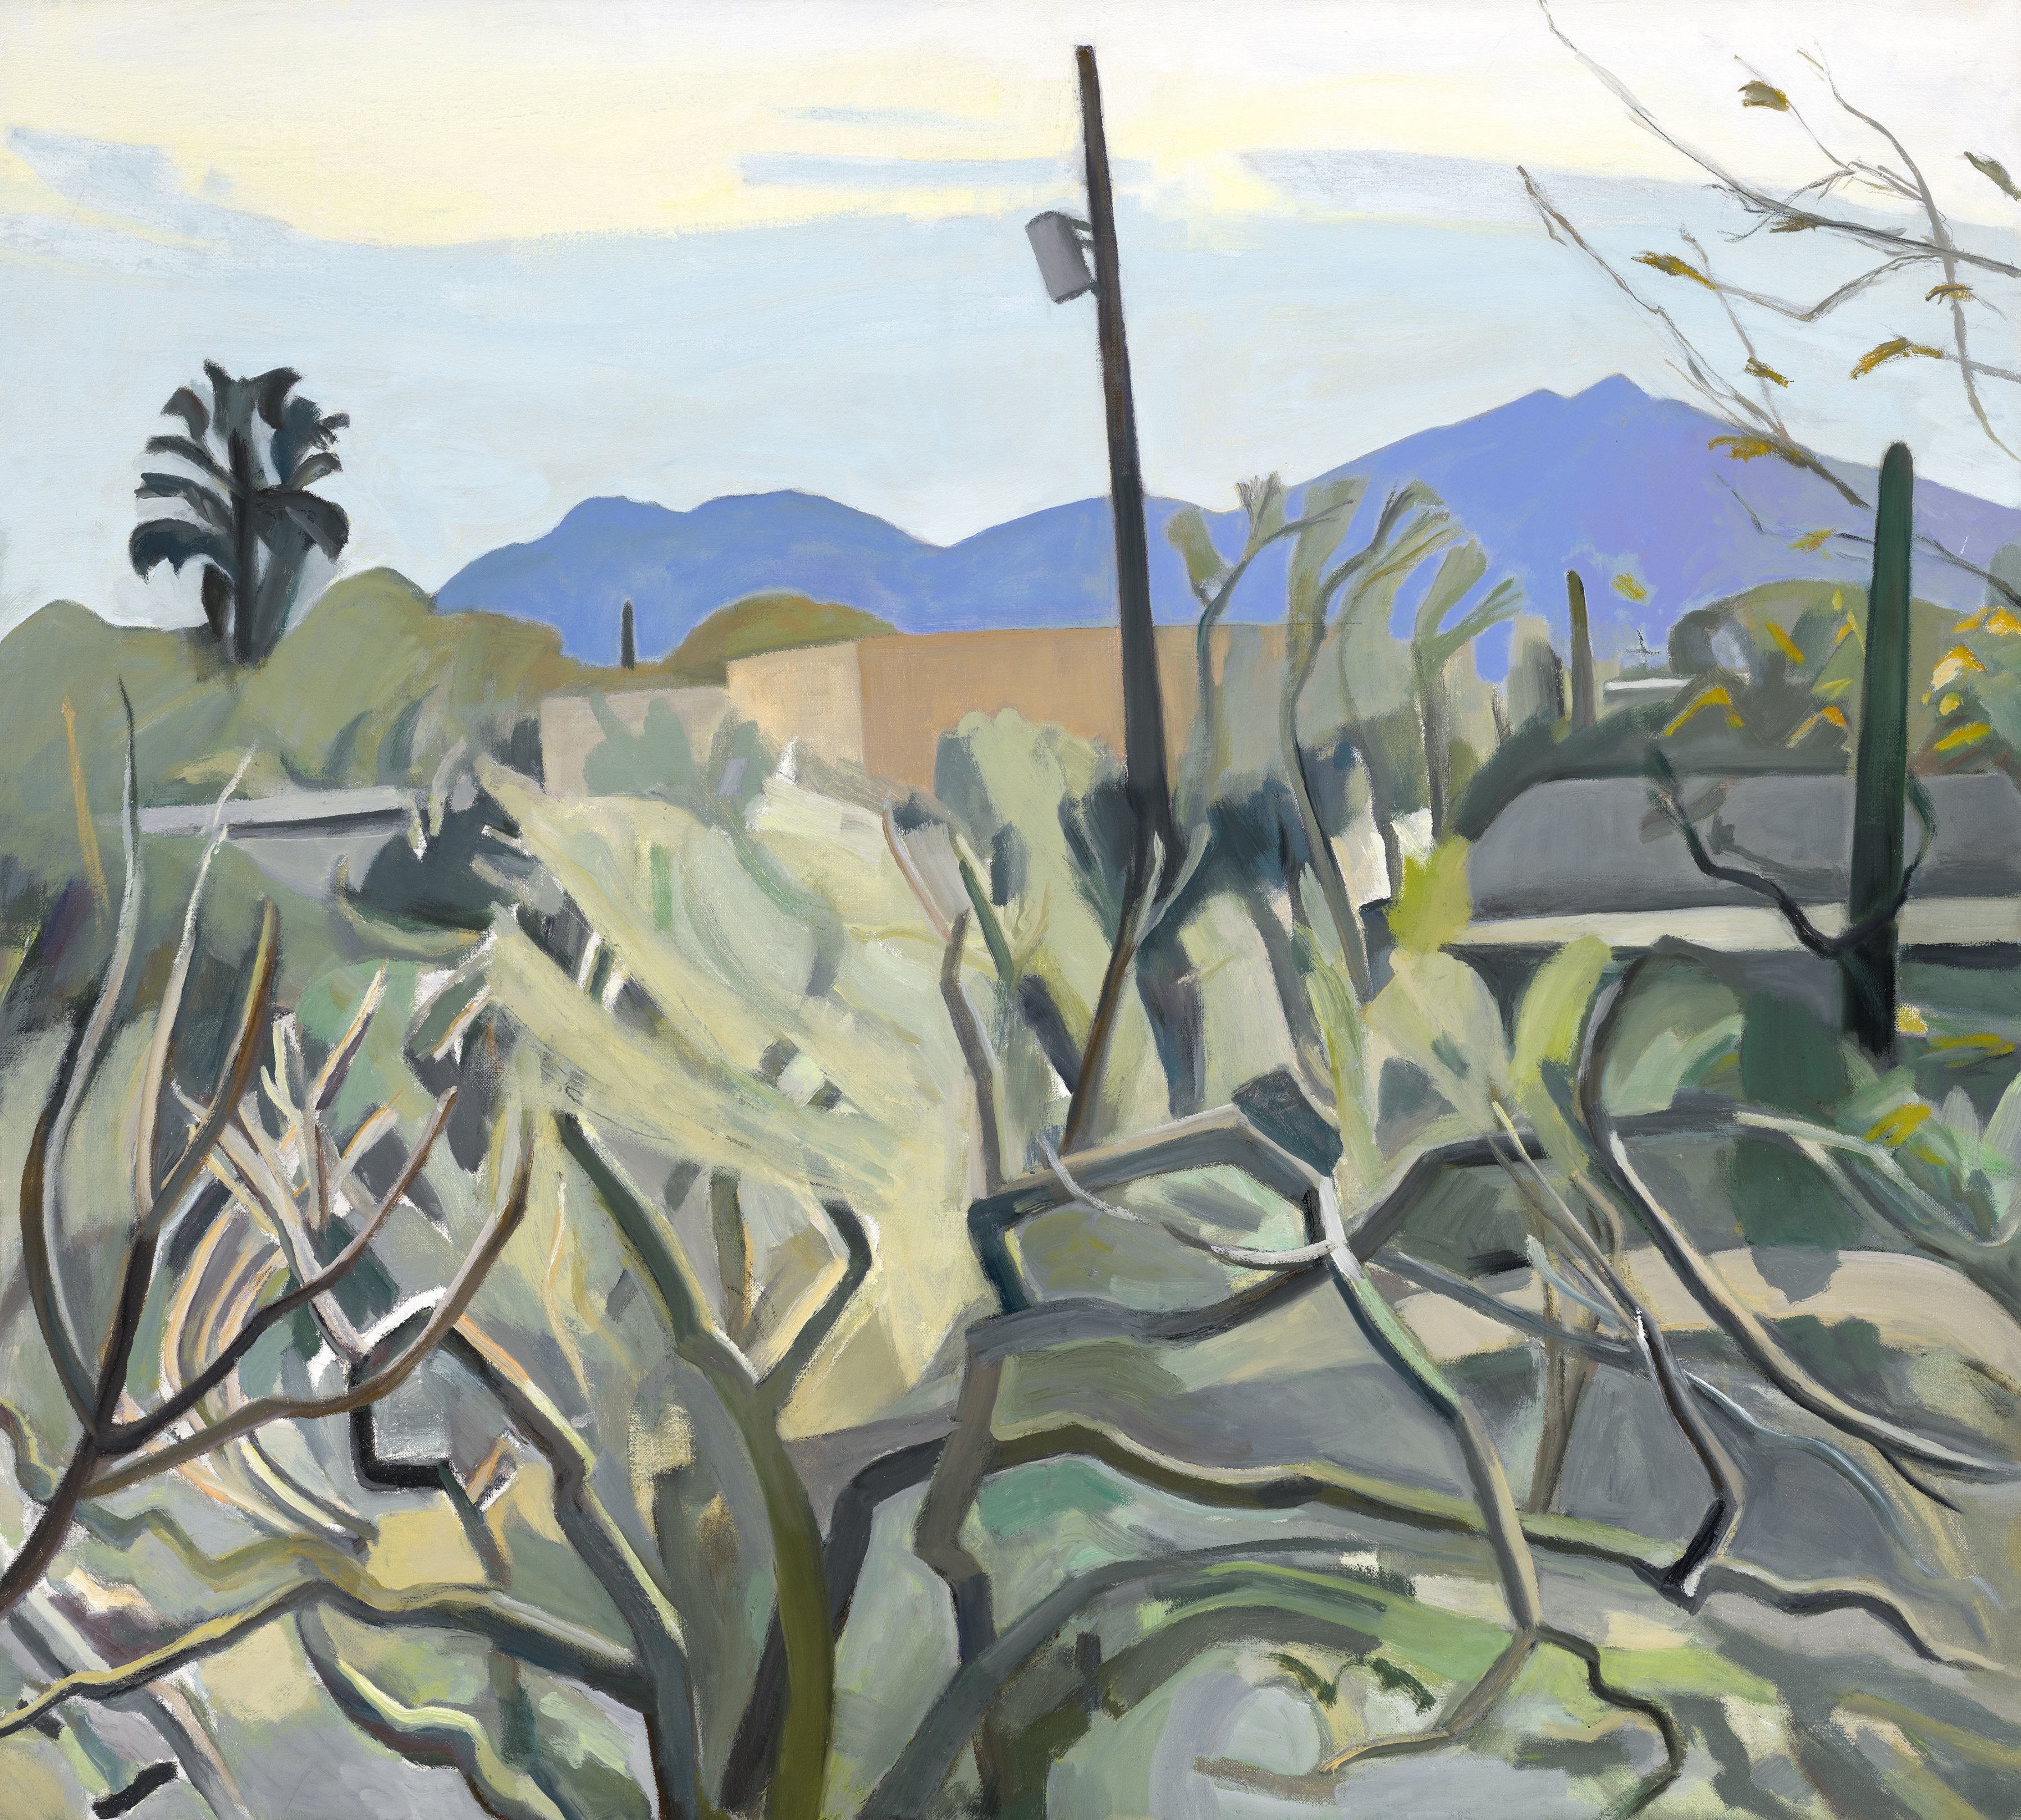 Martha Armstrong - New Paintings: Vermont, Mt. Gretna, Tucson - Exhibitions - Gross McCleaf Gallery